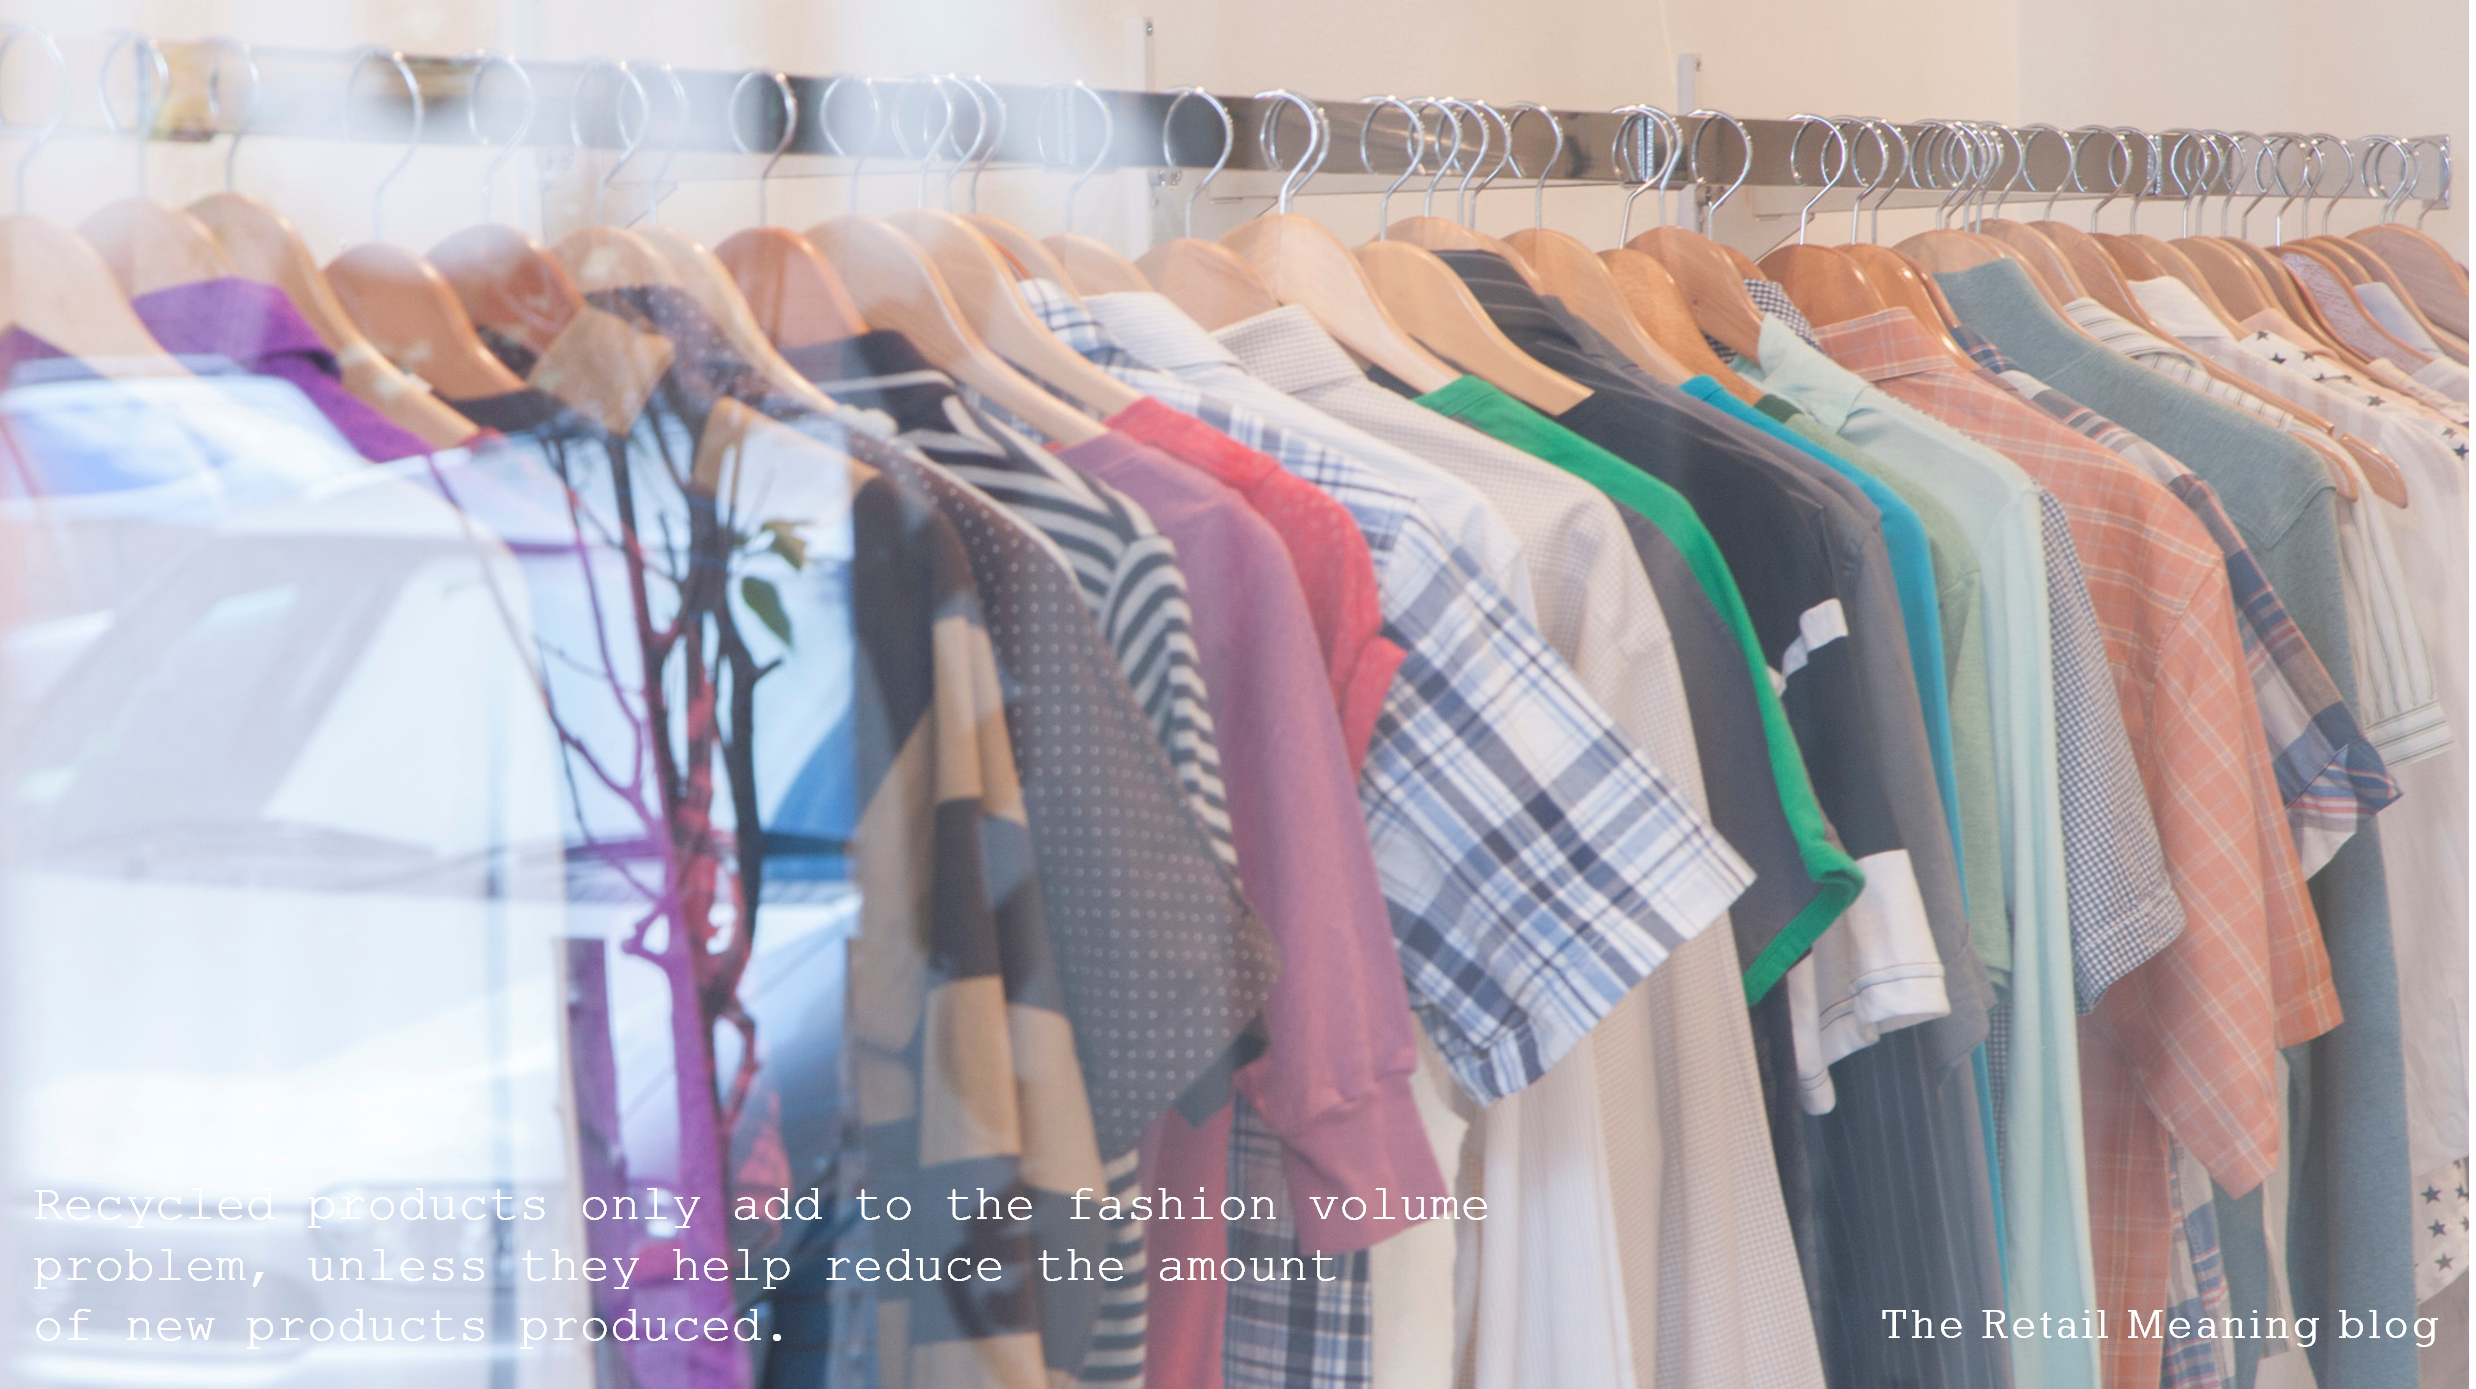 Recycled products only add to the fashion volume problem, unless they help reduce the amount of new products produced.